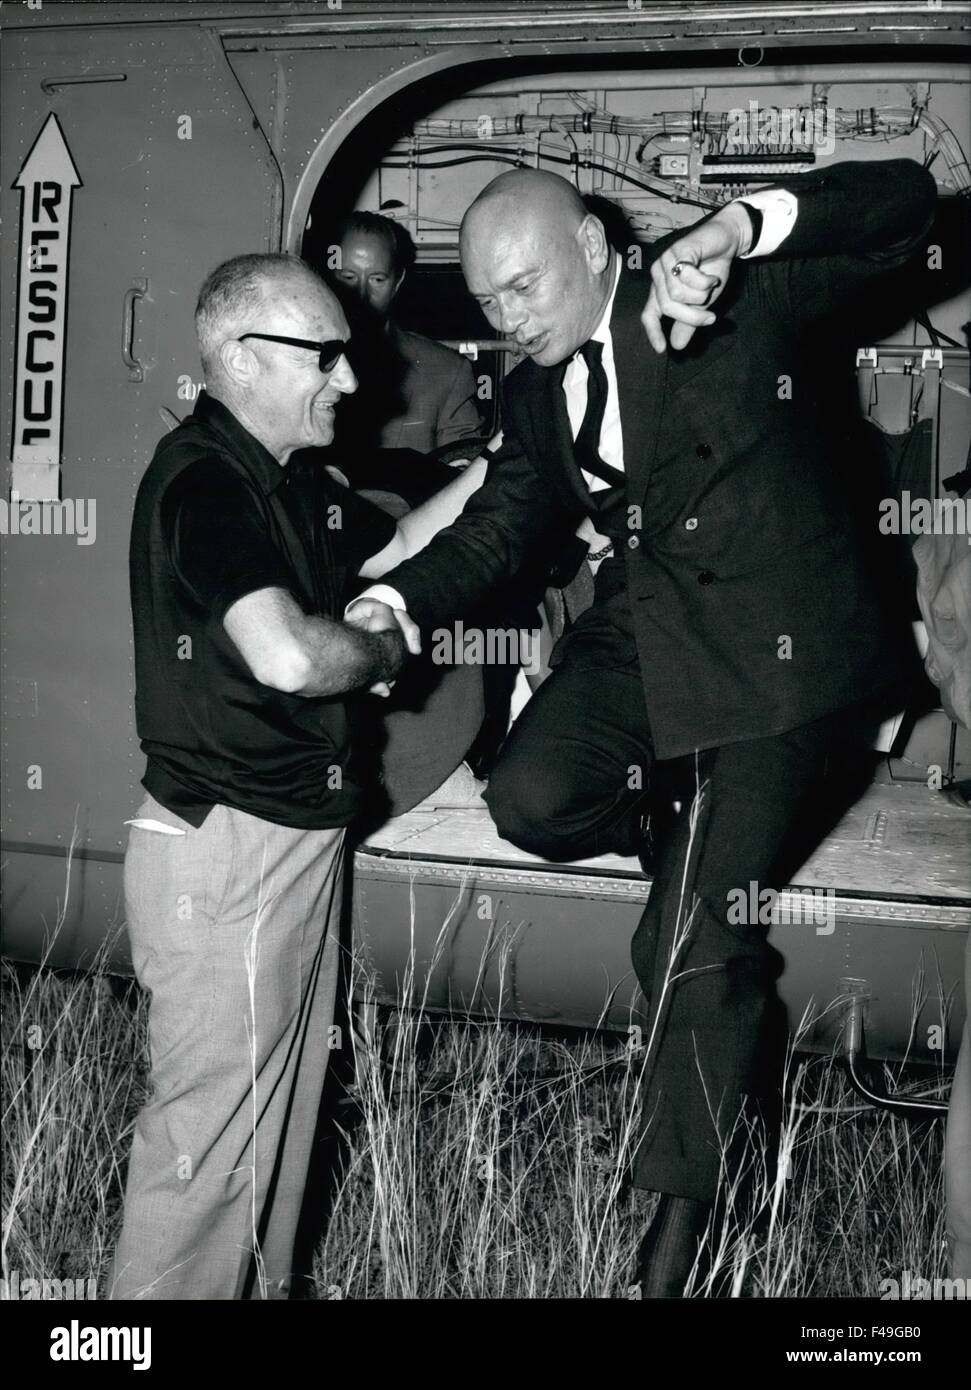 August 1966 - Rome - The film festival in Taormine, ended and the Prizes ''David Di Donatello'' were delivered to the actors. photo shows American actor Yul Brynner arrives at Taormine. © Keystone Pictures USA/ZUMAPRESS.com/Alamy Live News Stock Photo